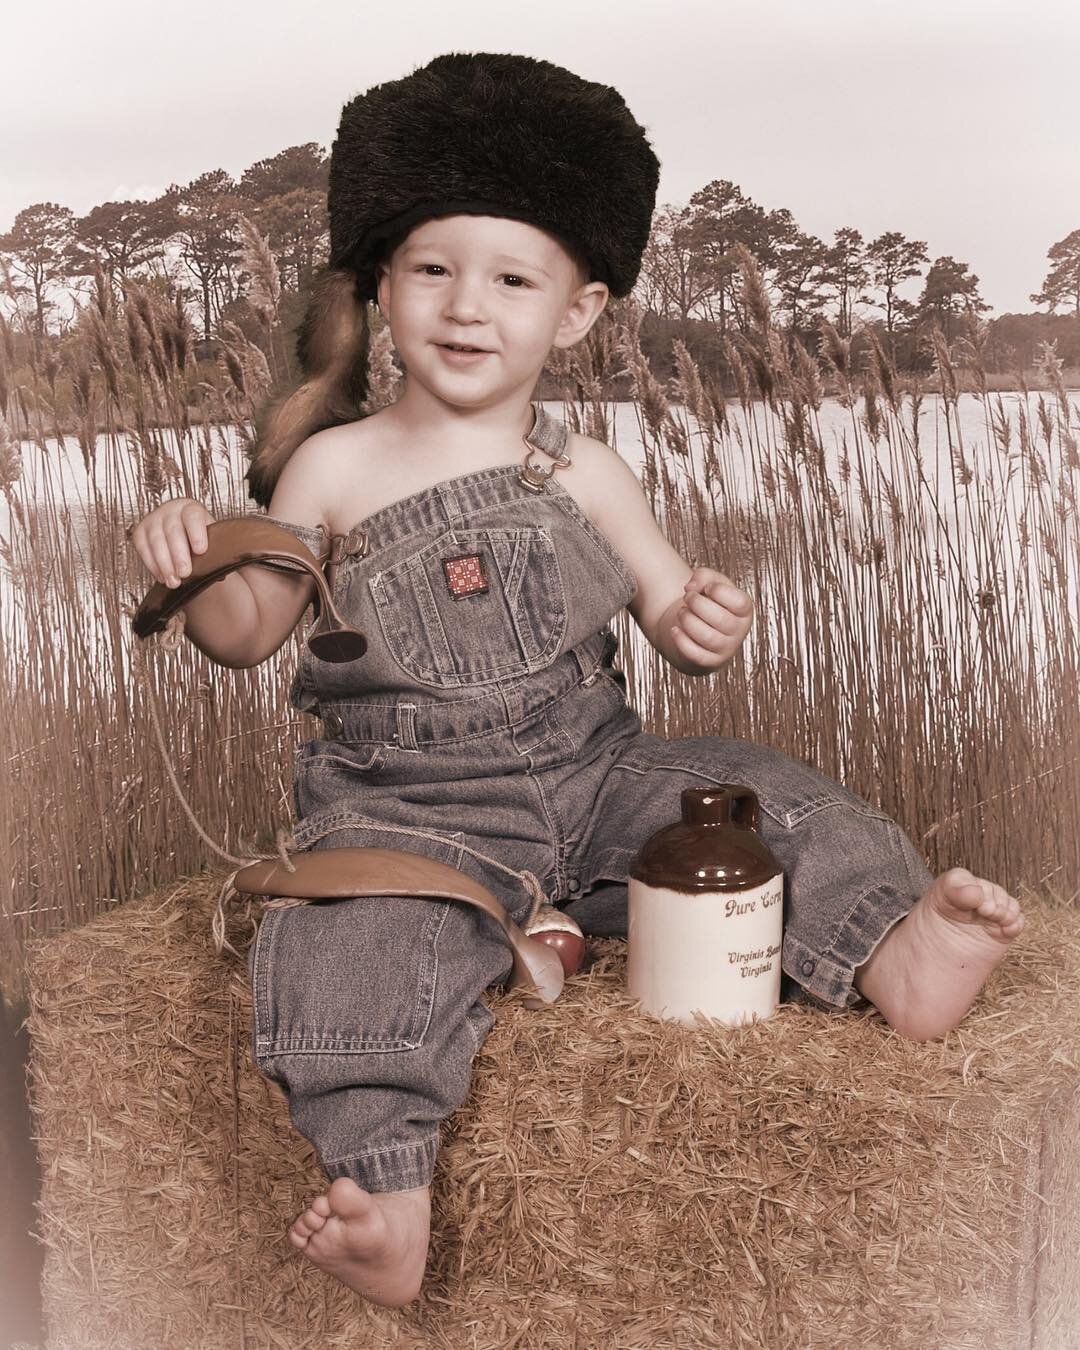 Hillbilly Porter caught a fish at our fishing hole!! Anybody wanna fry it for him? We have costumes in all sizes so come on in and see us today! #oldtimephotos #oldtimephoto #hillbilly #babyboy #fishing #greenscreen #overalls #child #costumes